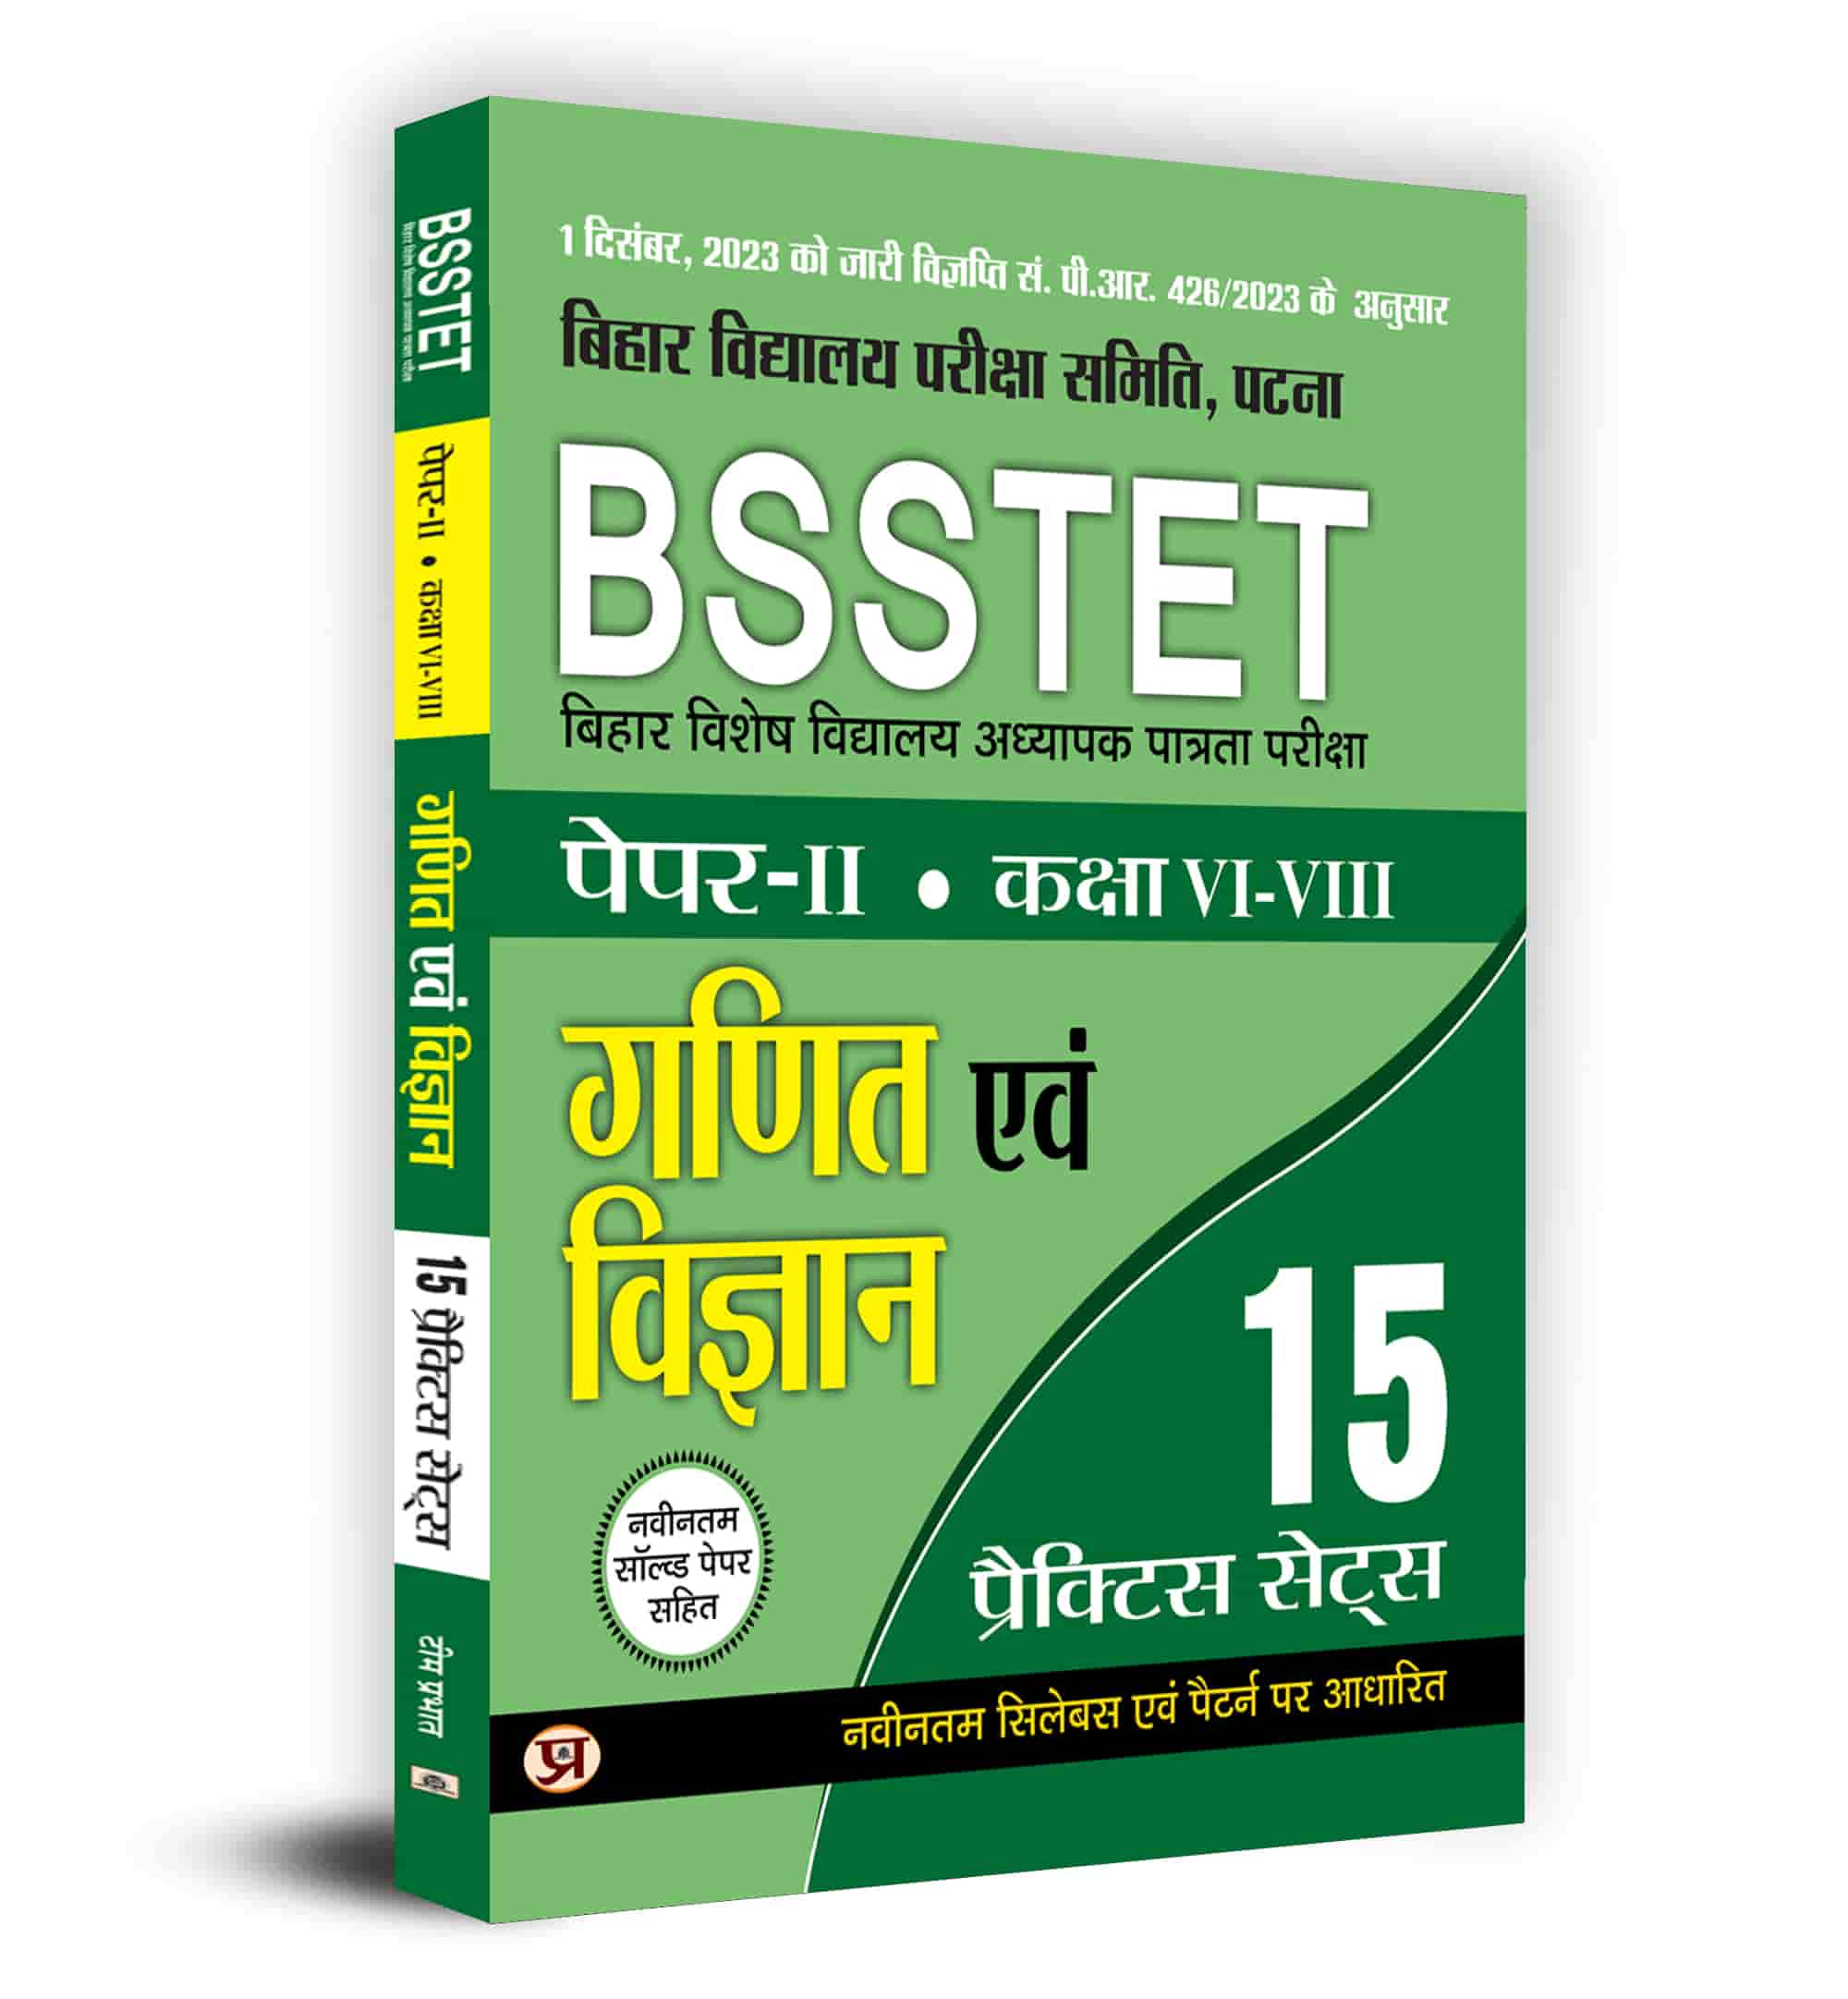 BSSTET Bihar Special School Teacher Eligibility Test Paper-2 Class 6-8 |Mathematics and Science 15 Practice Sets Book in Hindi